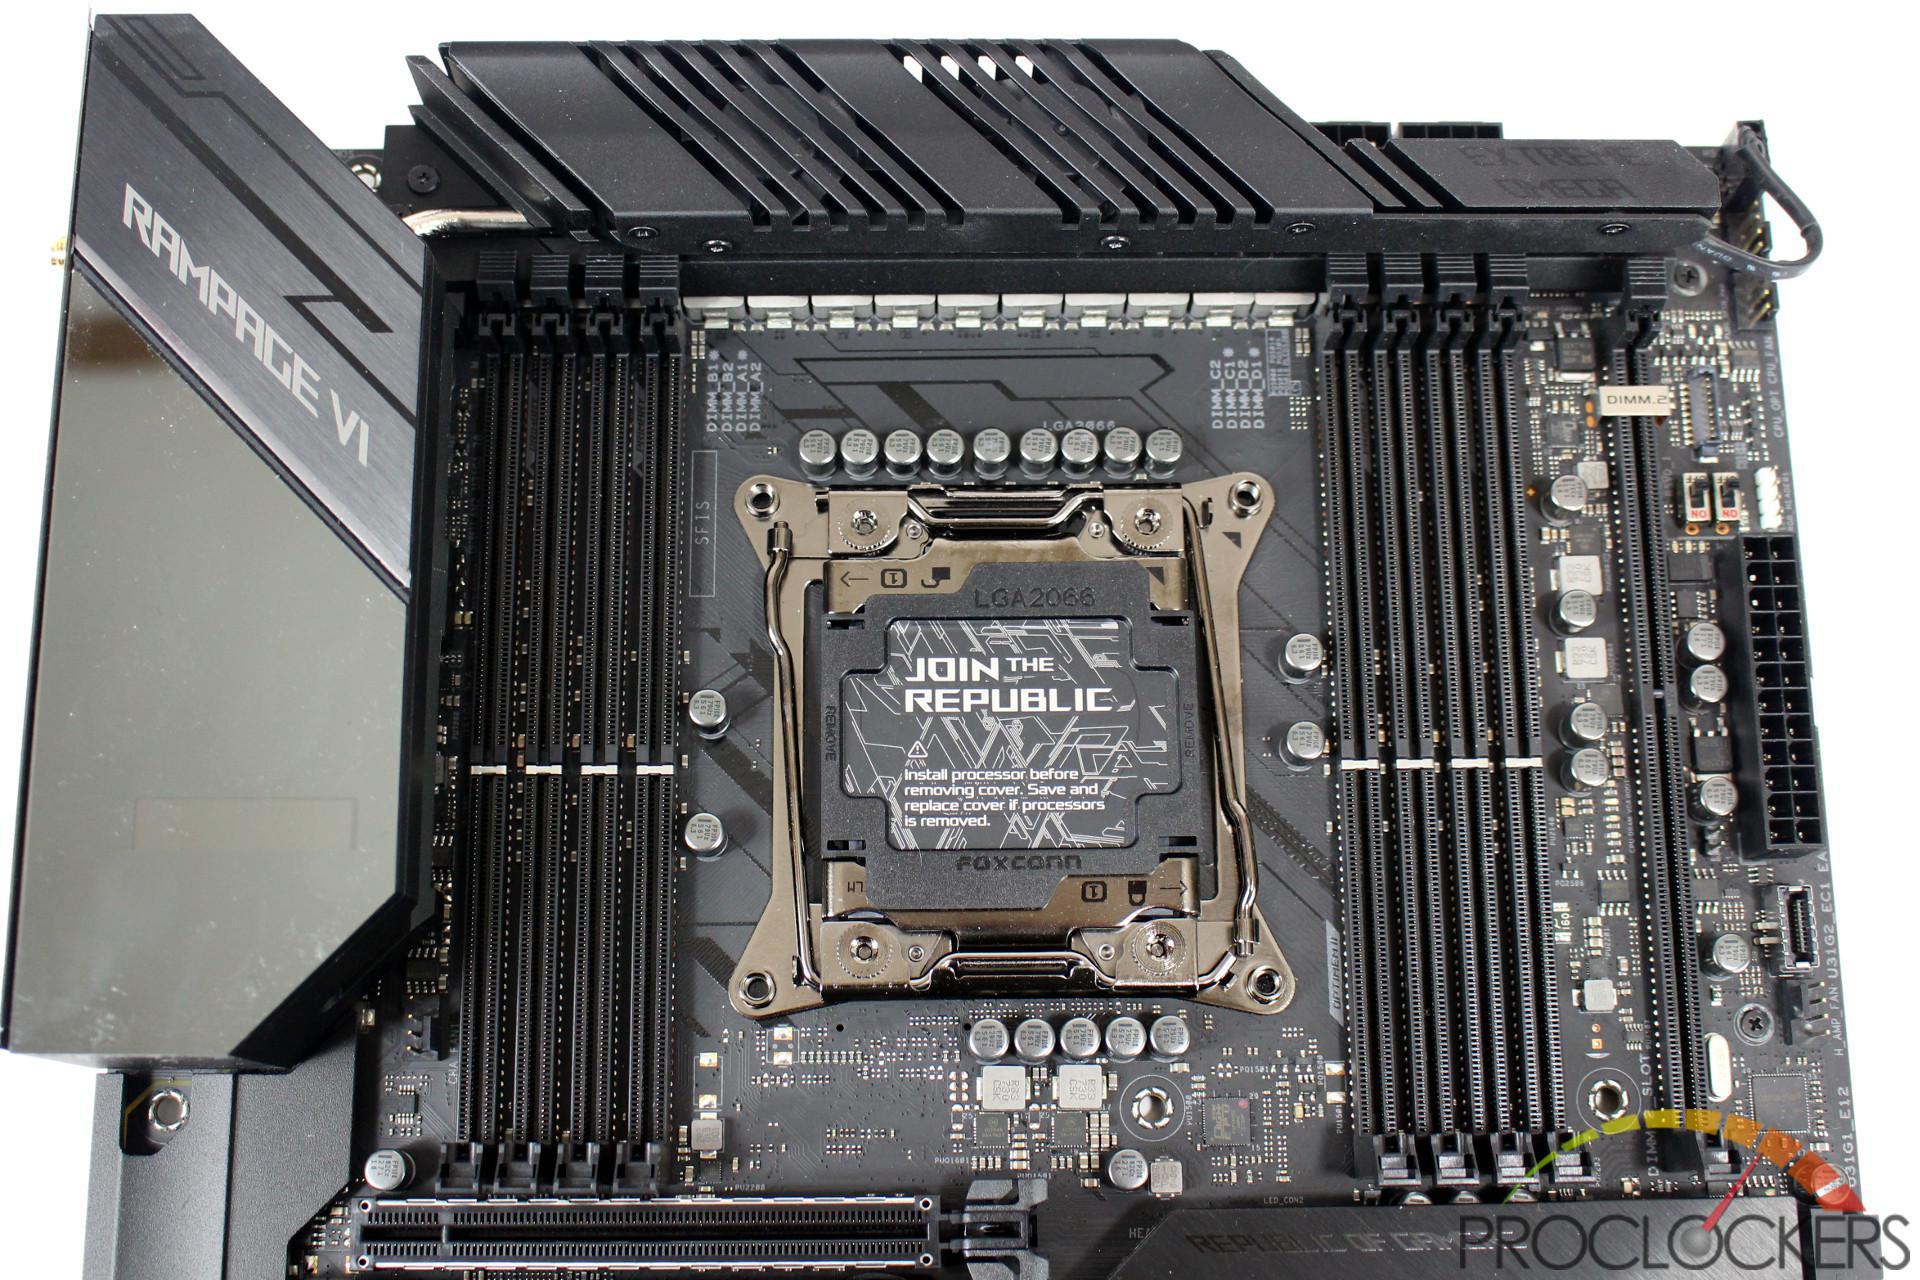 ASUS ROG Rampage VI Extreme Omega review (Page 3)